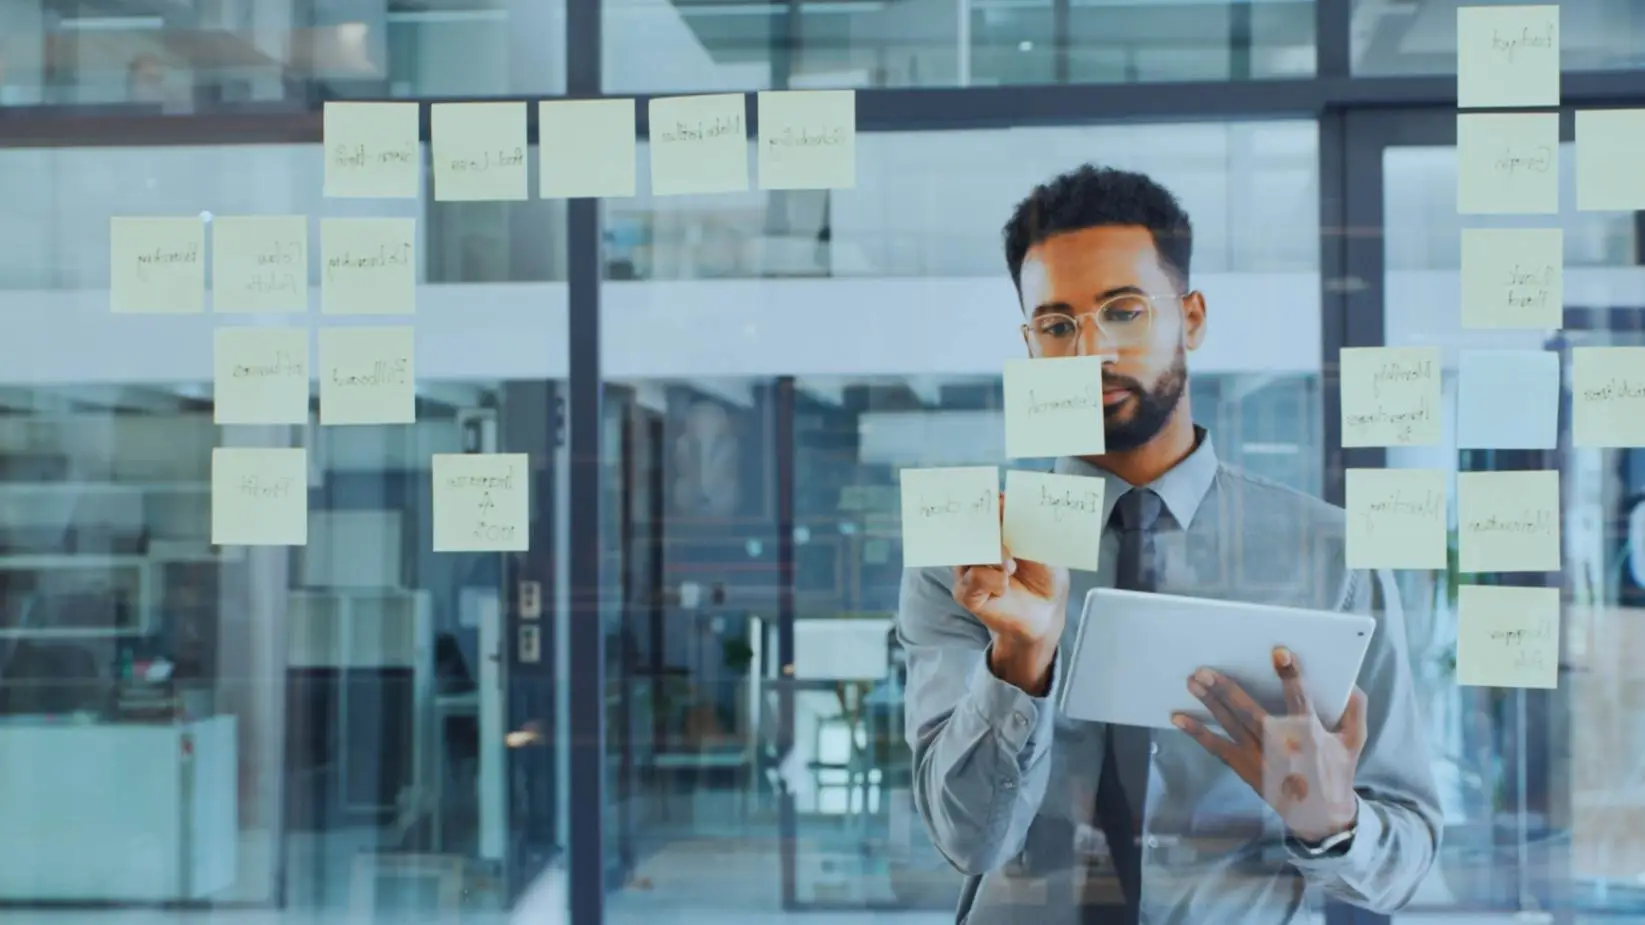 "African American businessman analyzing a strategic planning session using sticky notes on a glass wall in a bright office environment."